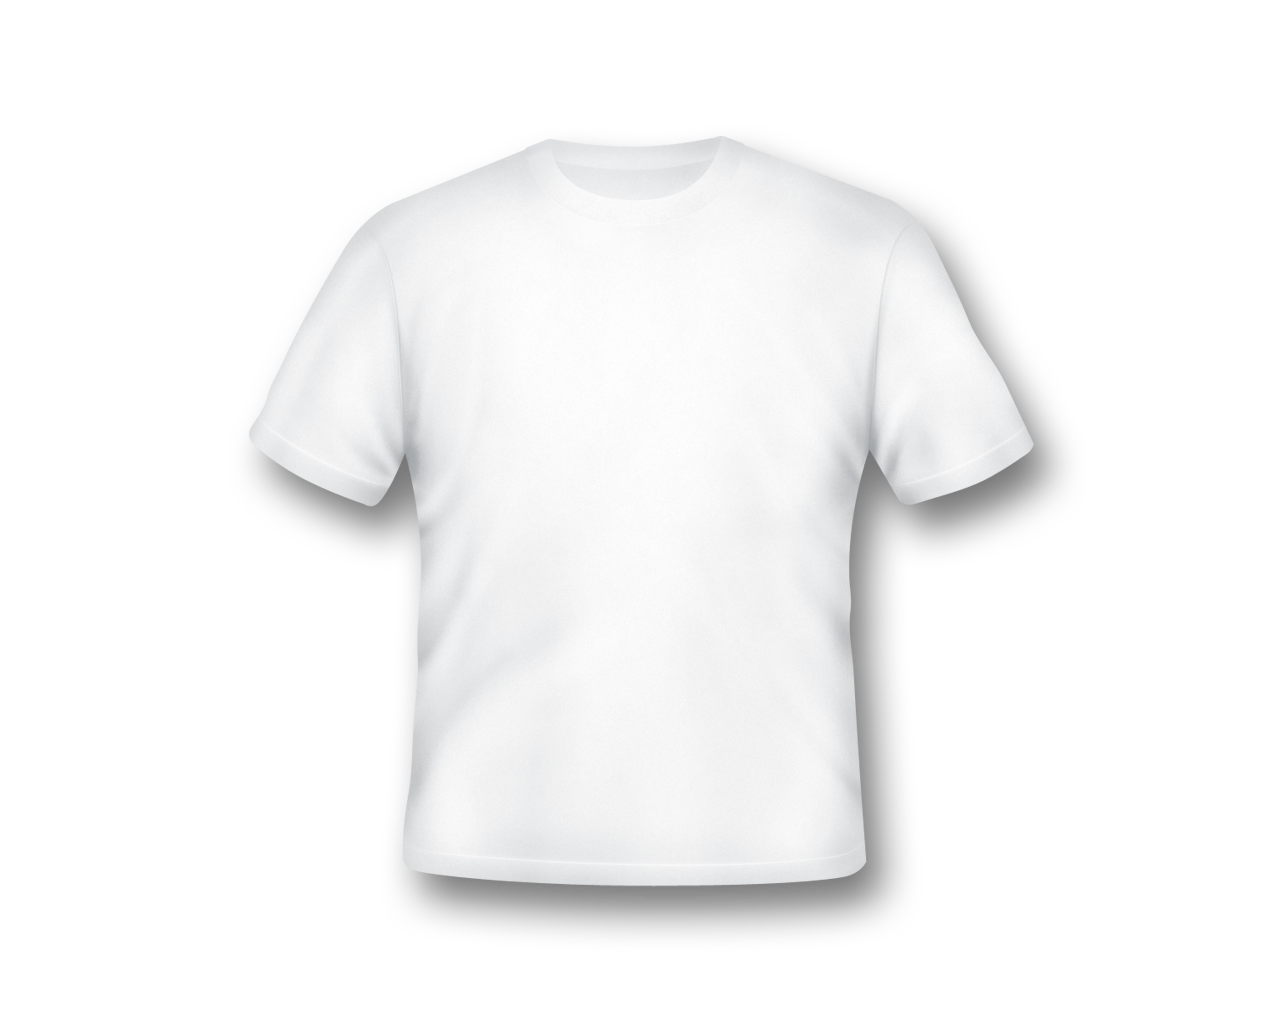 Blank White T Shirt Template PNG